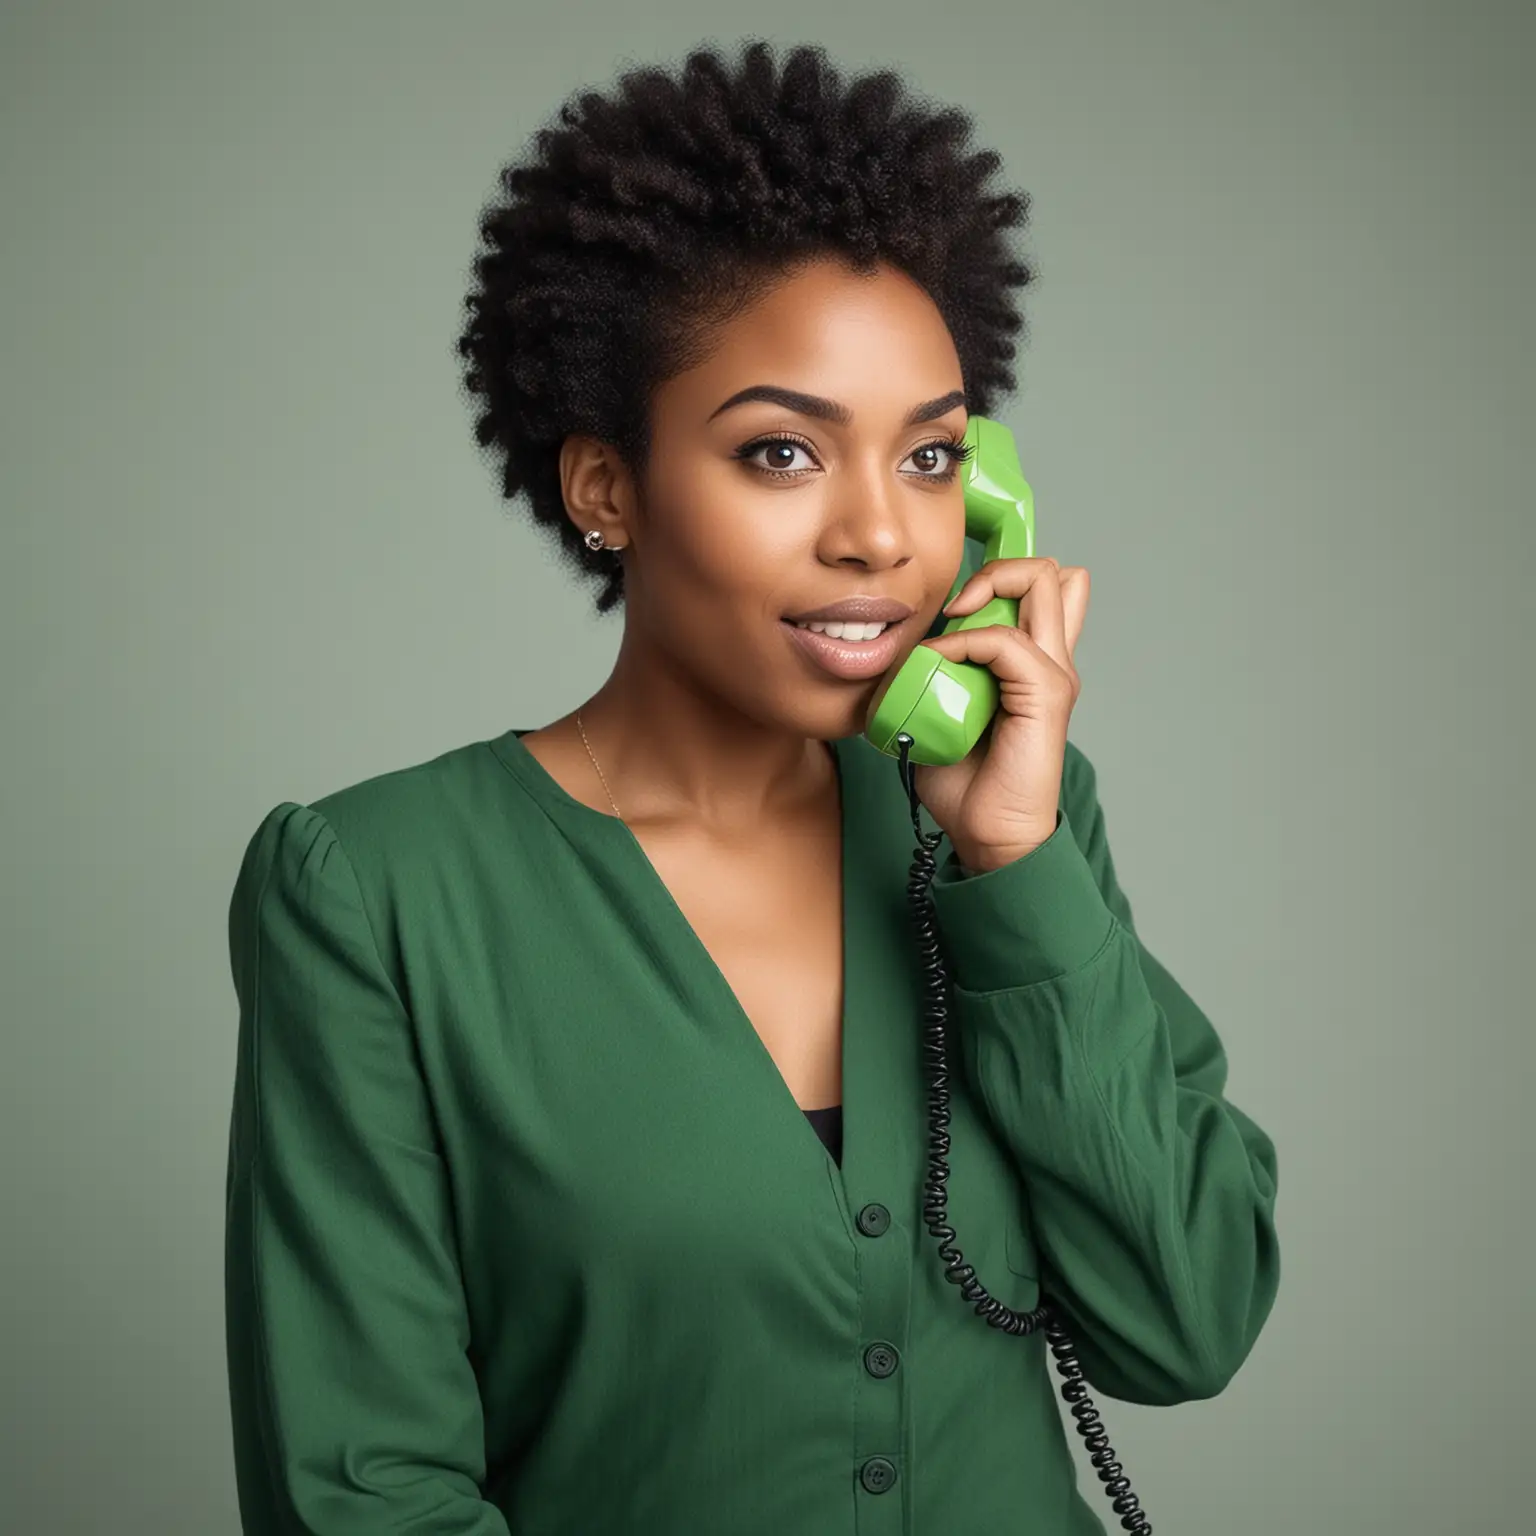 African American Woman Having a Conversation on Vibrant Green Phone